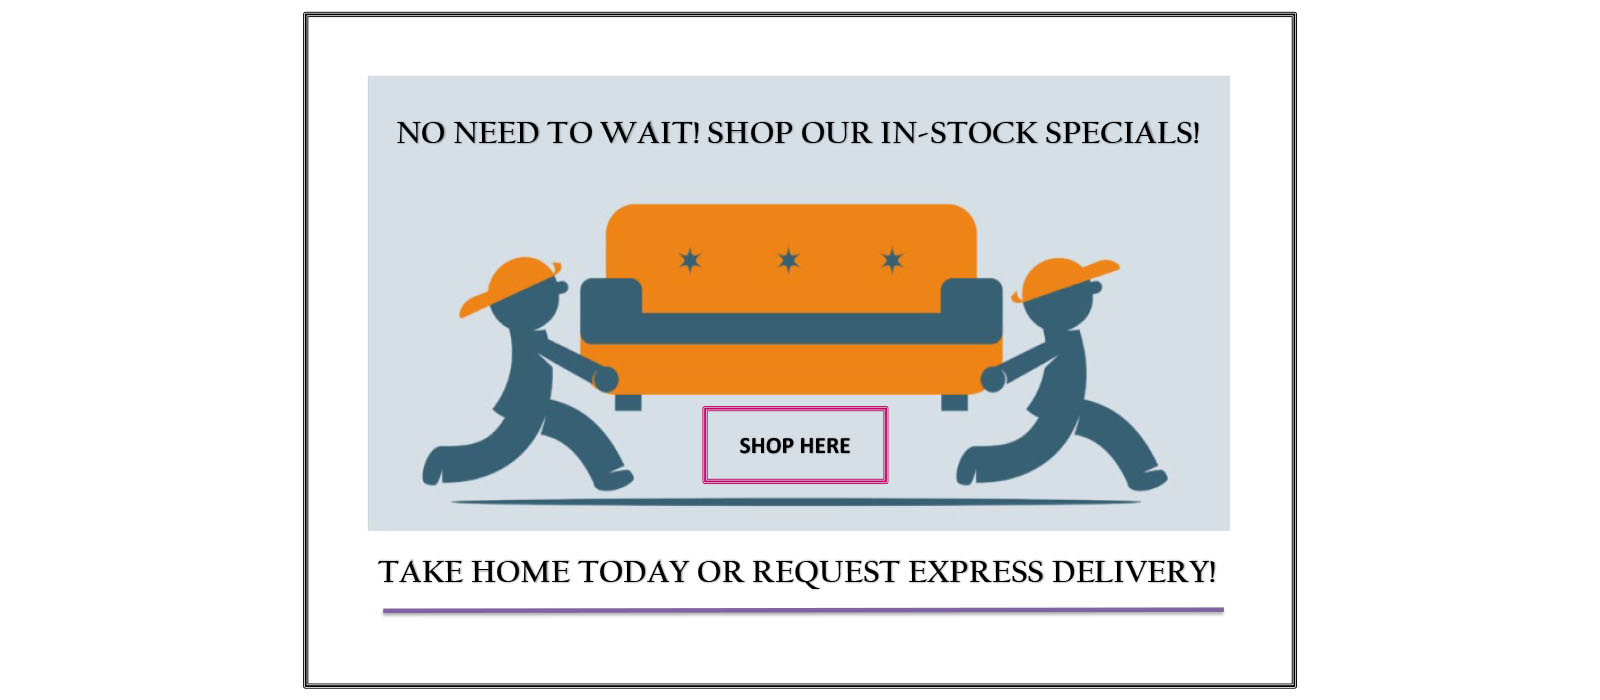 No need to wait! Shop our In-Stock Specials!